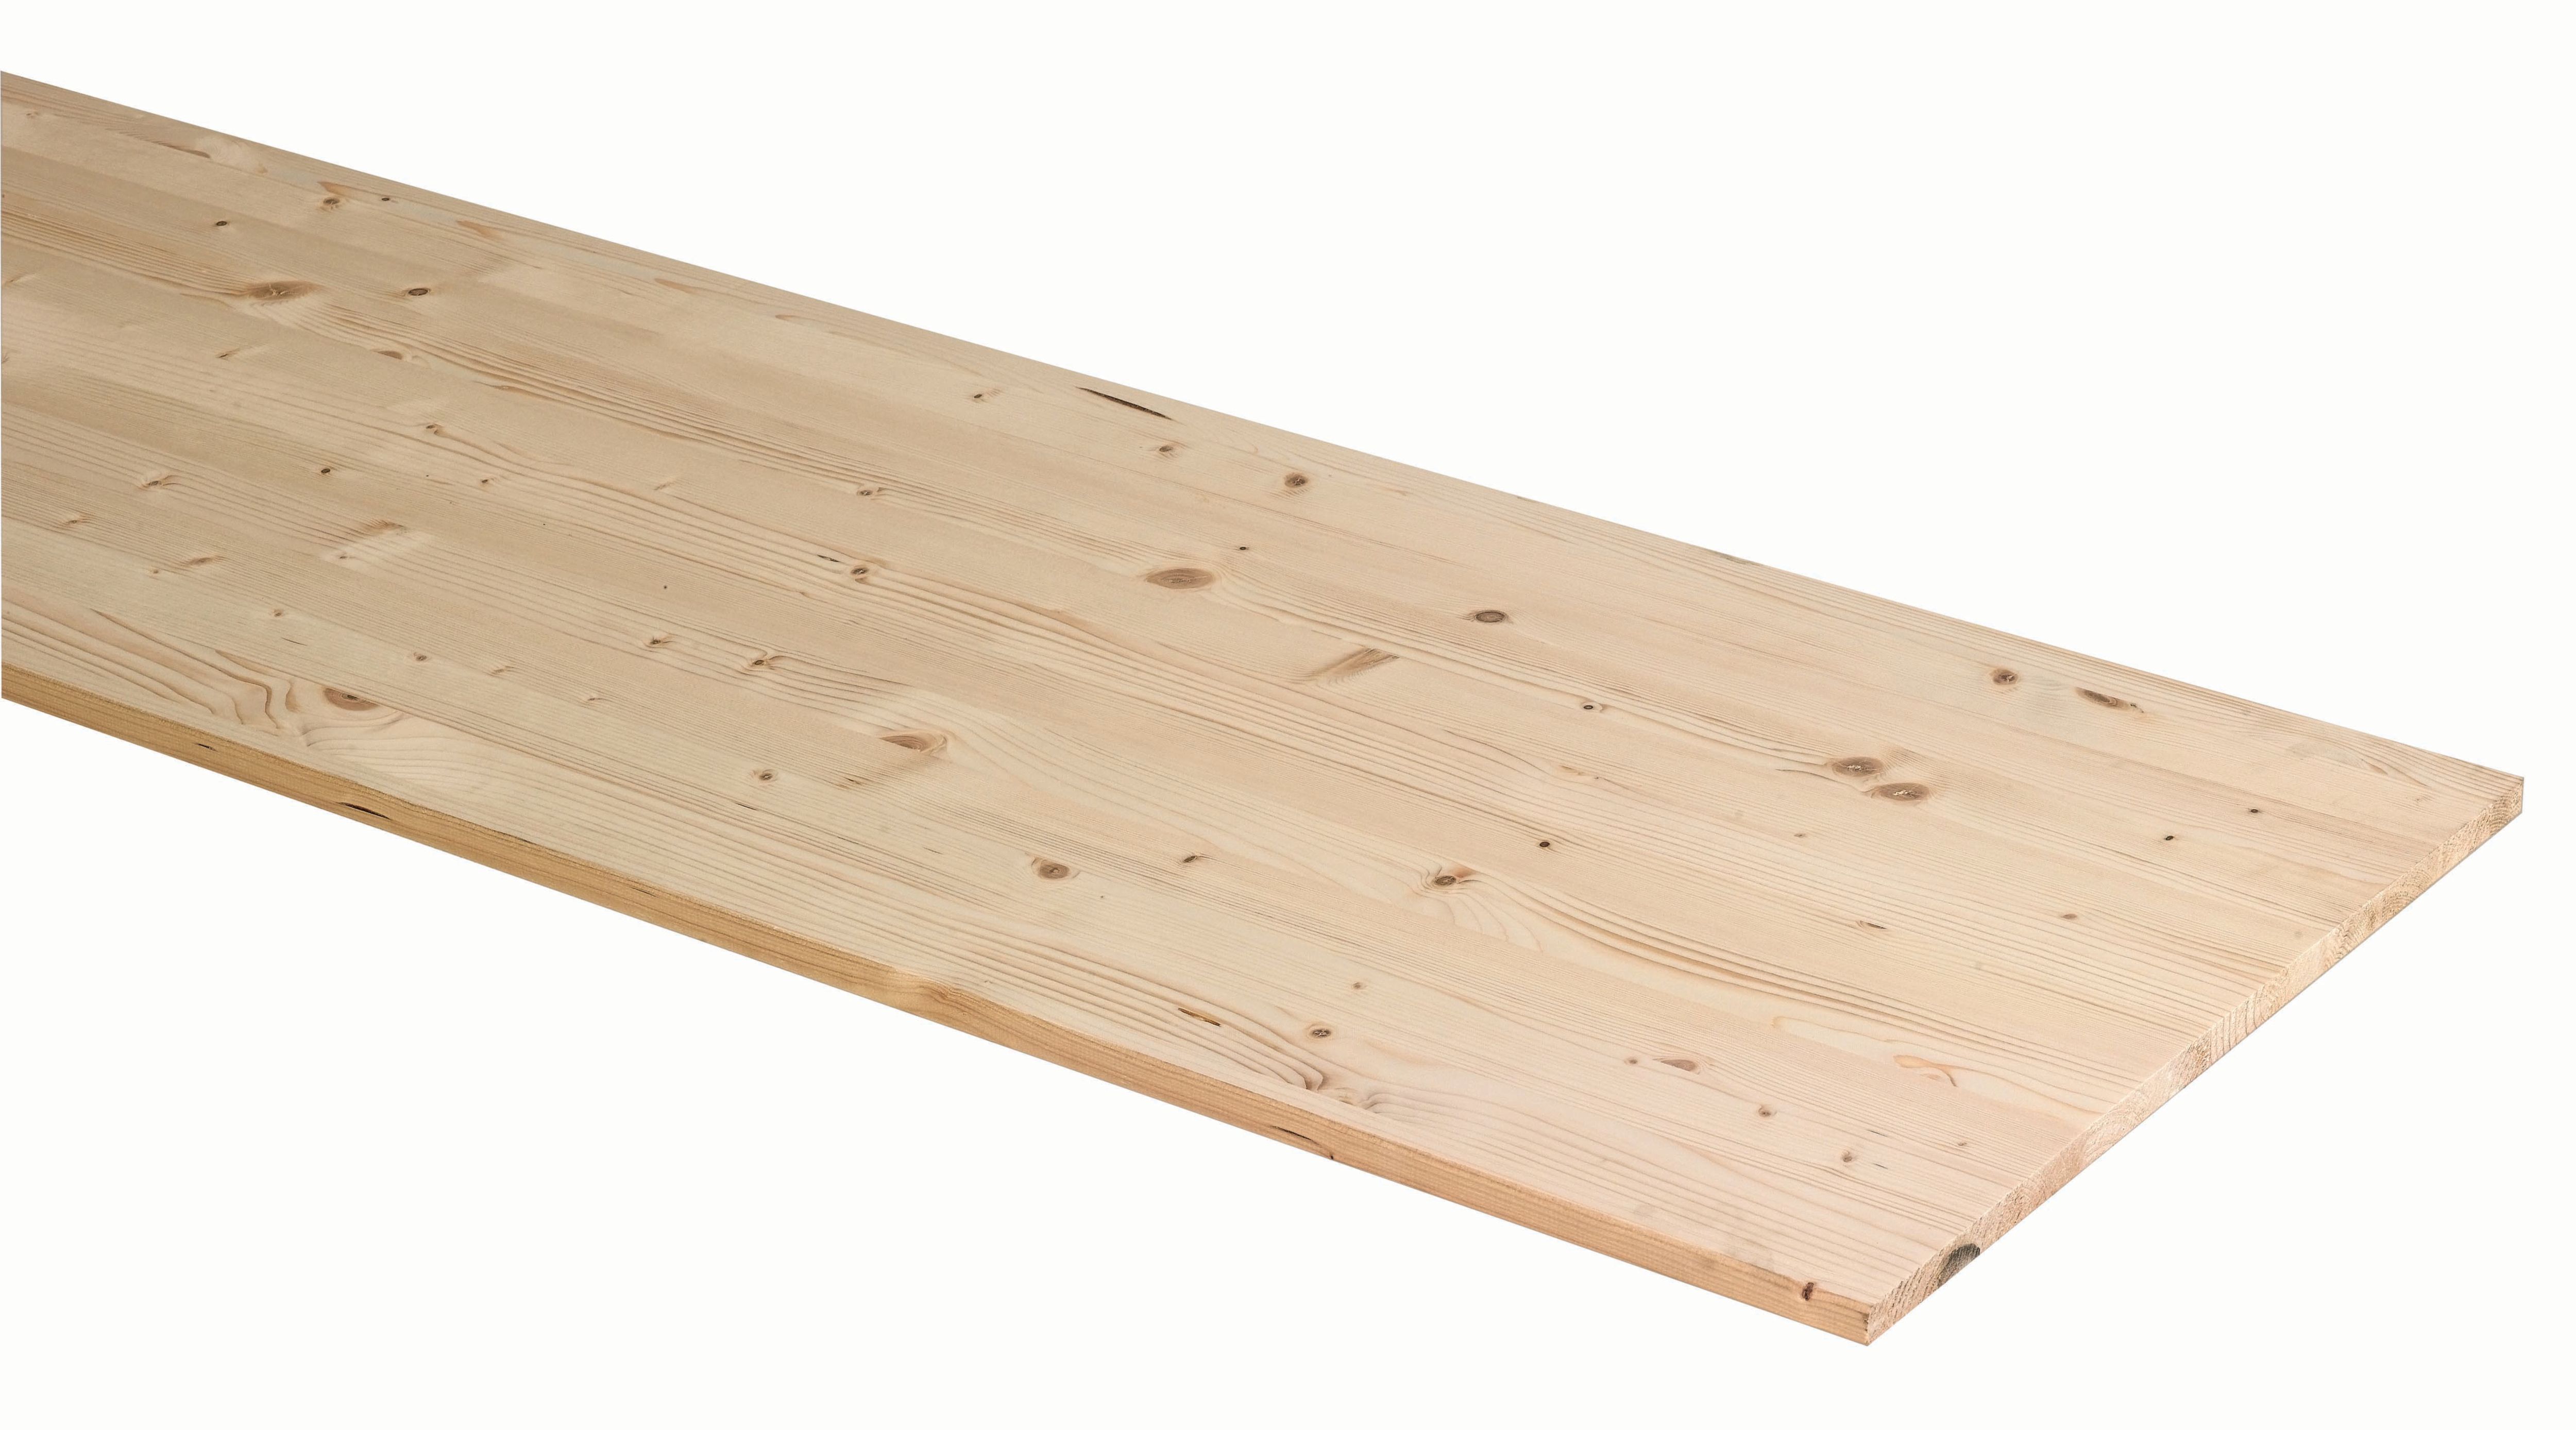 Image of Wickes General Purpose Spruce Timberboard - 18 x 200 x 1150mm